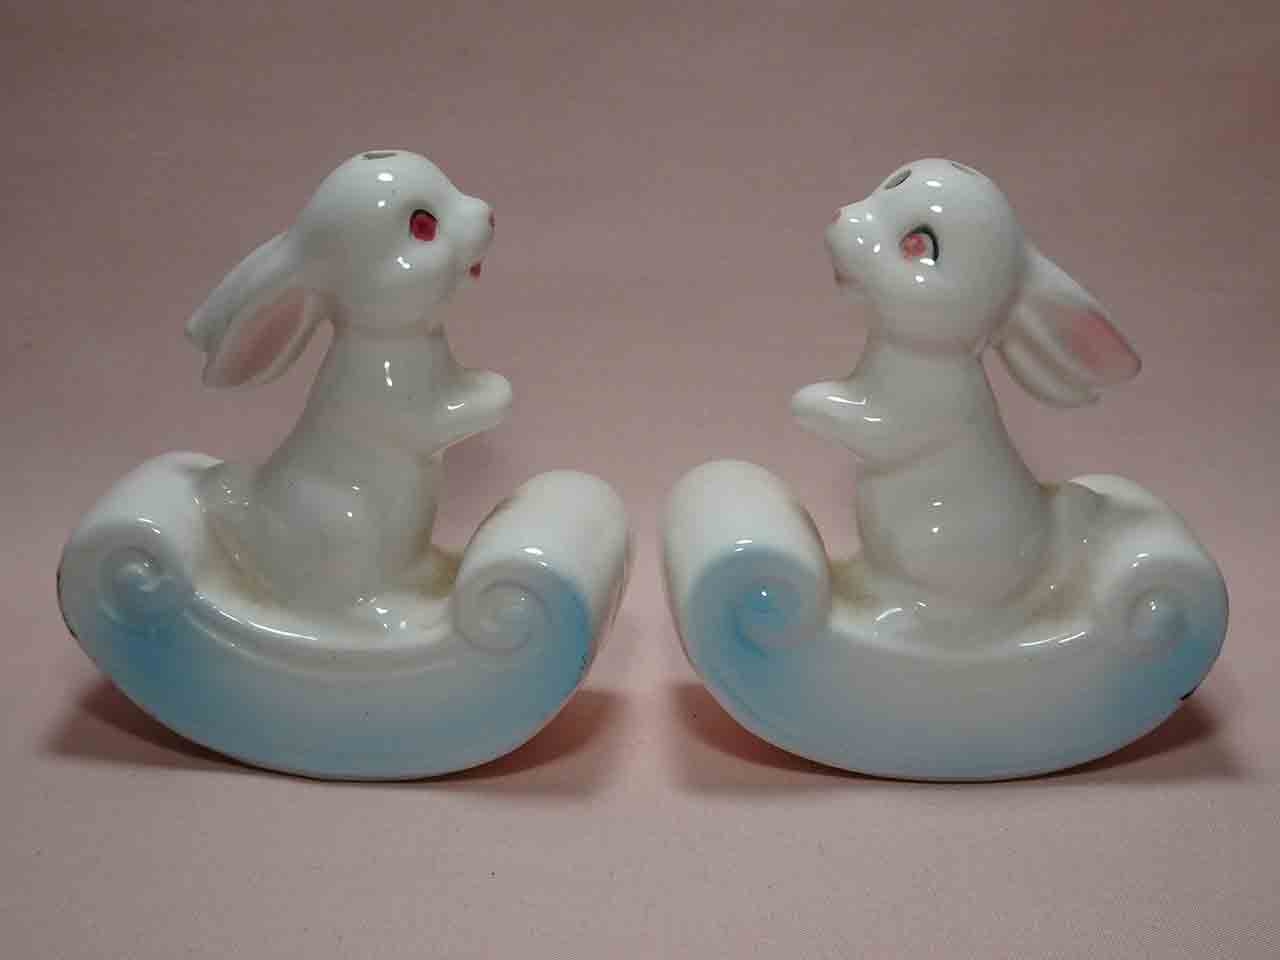 Rocking rabbits salt and pepper shakers